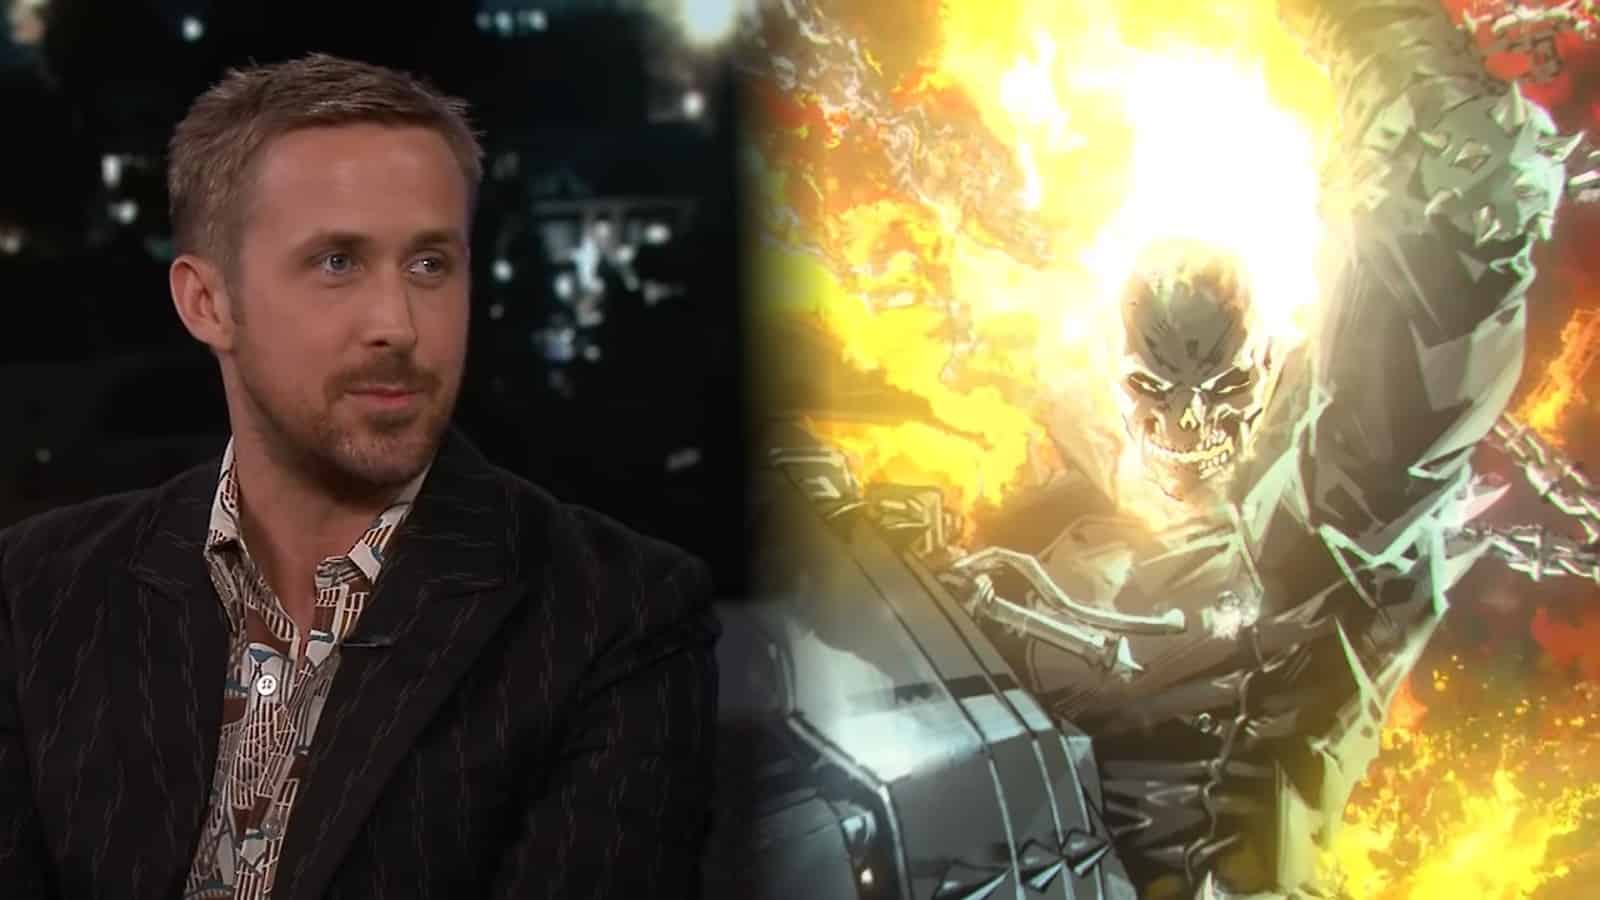 Ryan Gosling said he wants to play Ghost Rider.